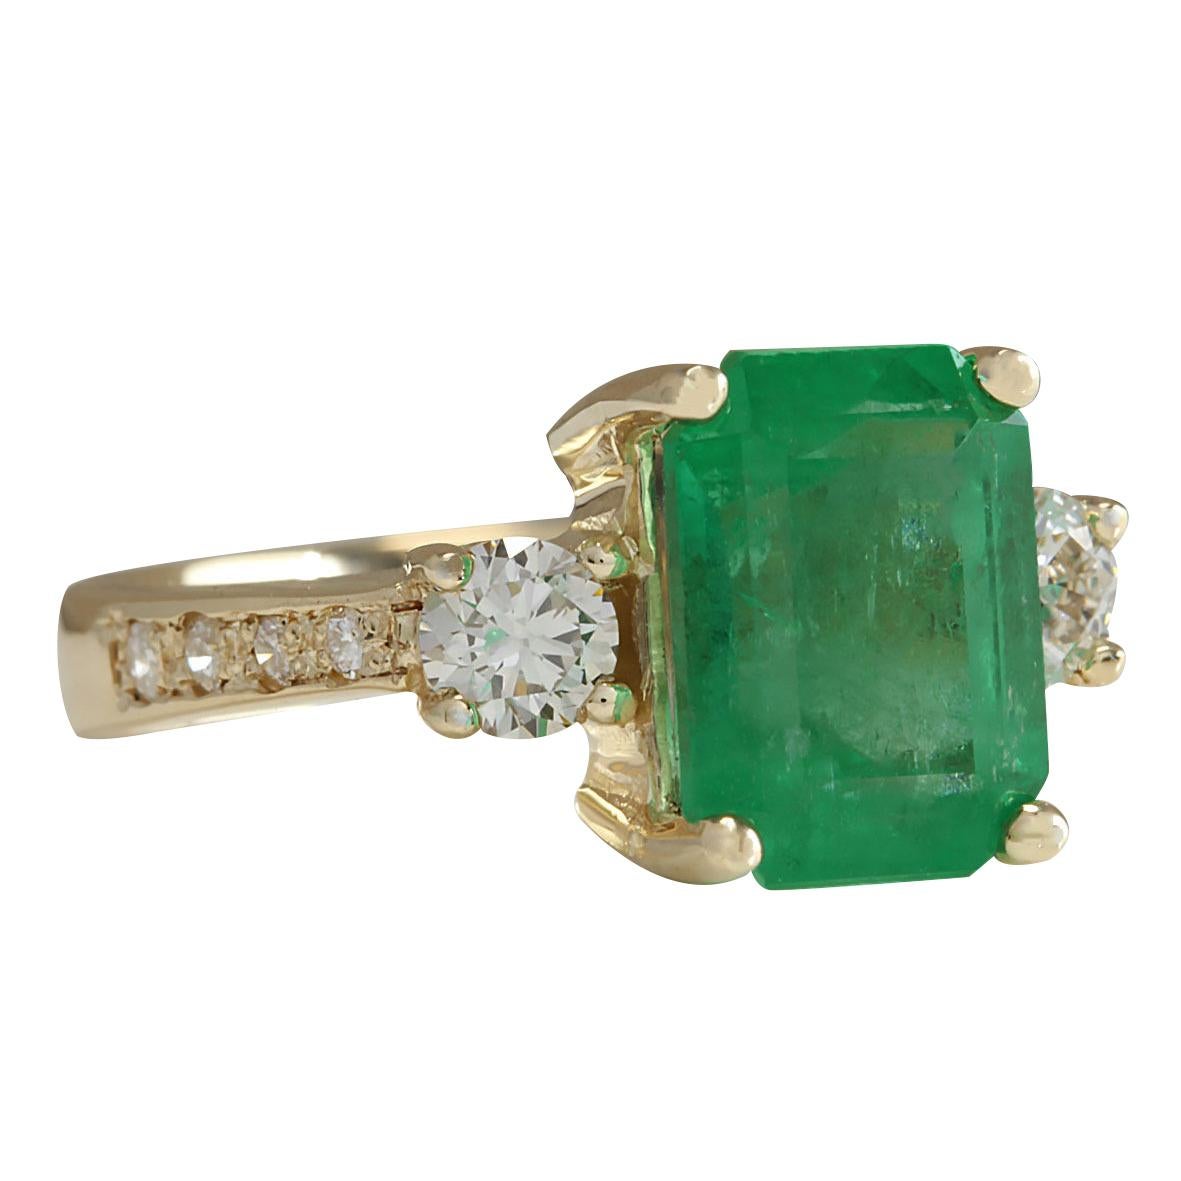 Stamped: 14K Yellow Gold
Total Ring Weight: 5.0 Grams
Emerald Weight is 4.00 Carat (Measures: 10.00x8.00 mm)
Diamond Weight is 0.70 Carat
Color: F-G, Clarity: VS2-SI1
Face Measures: 10.60x15.40 mm
Sku: [702716W]